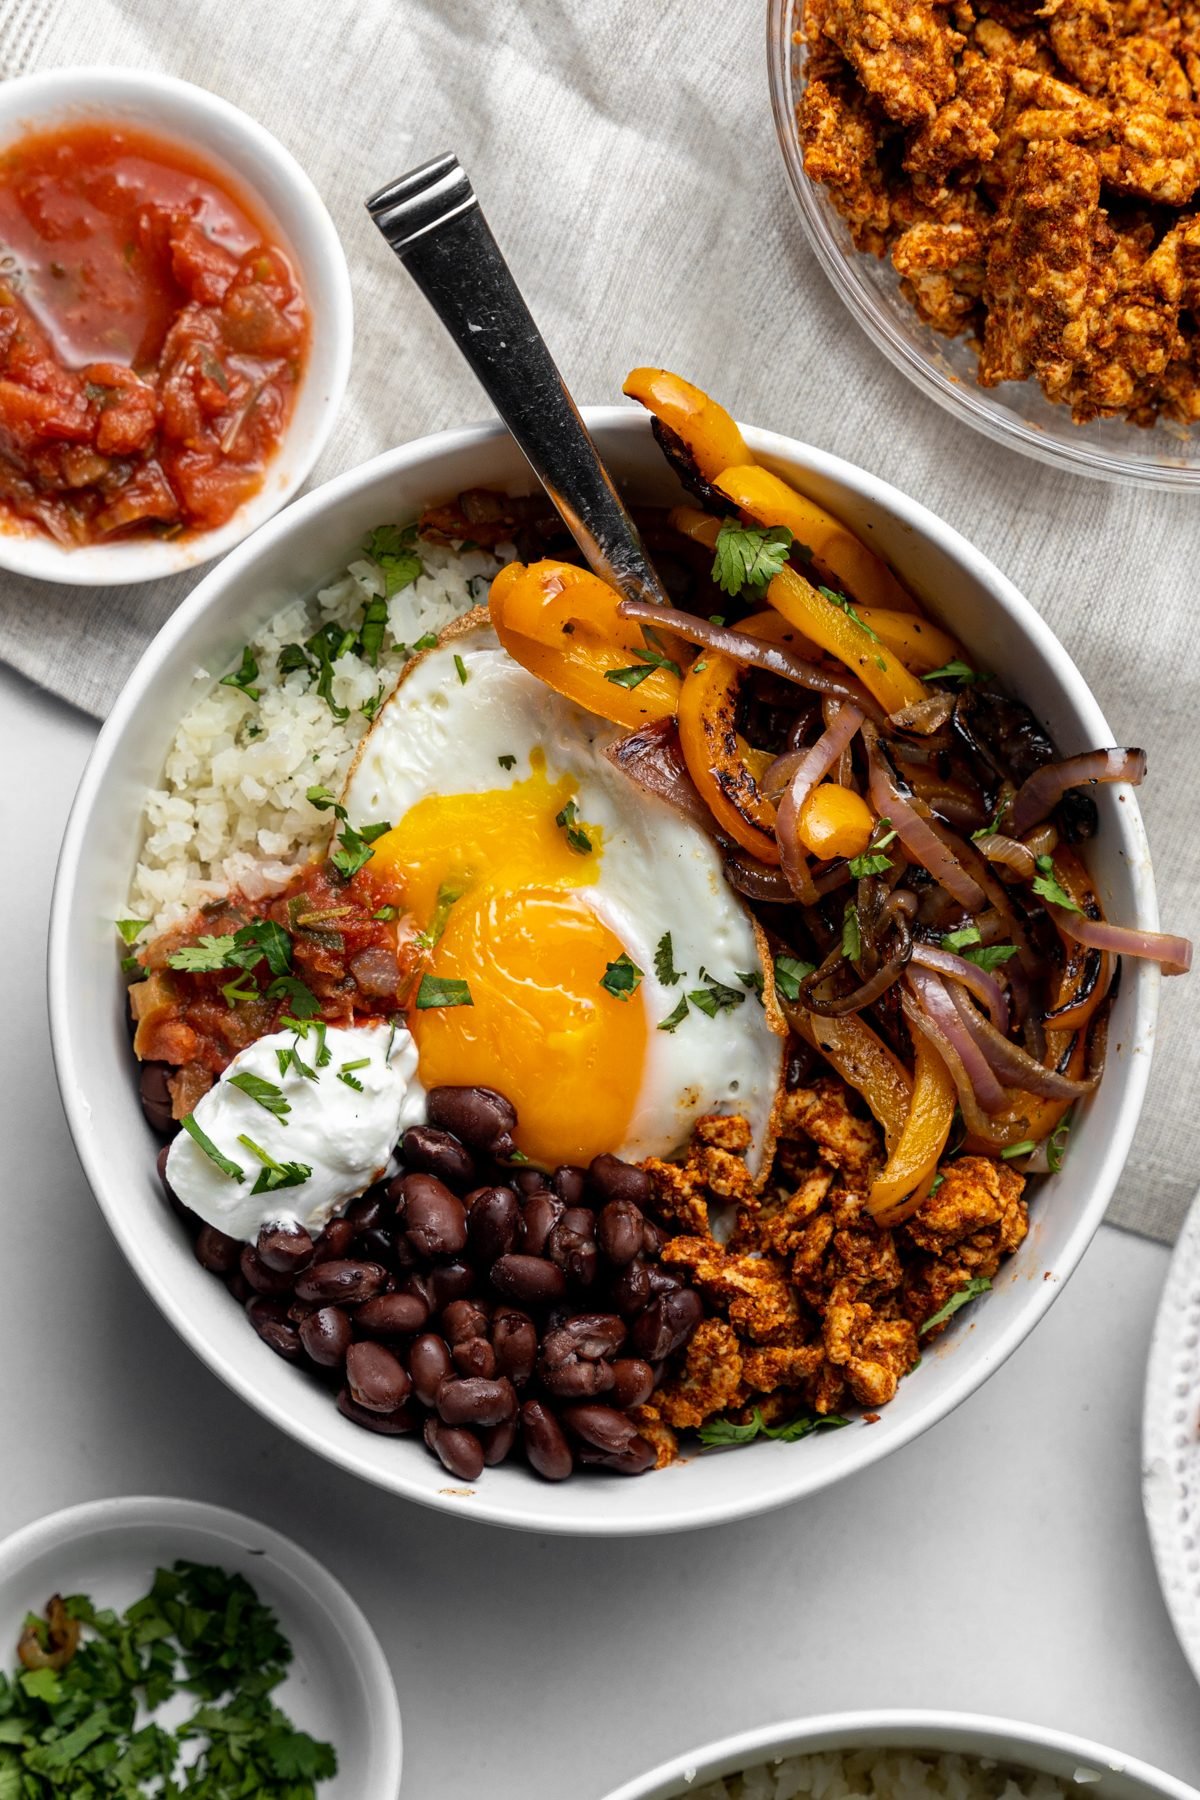 Fork in a breakfast burrito bowl with beans, egg, vegetables, and more.